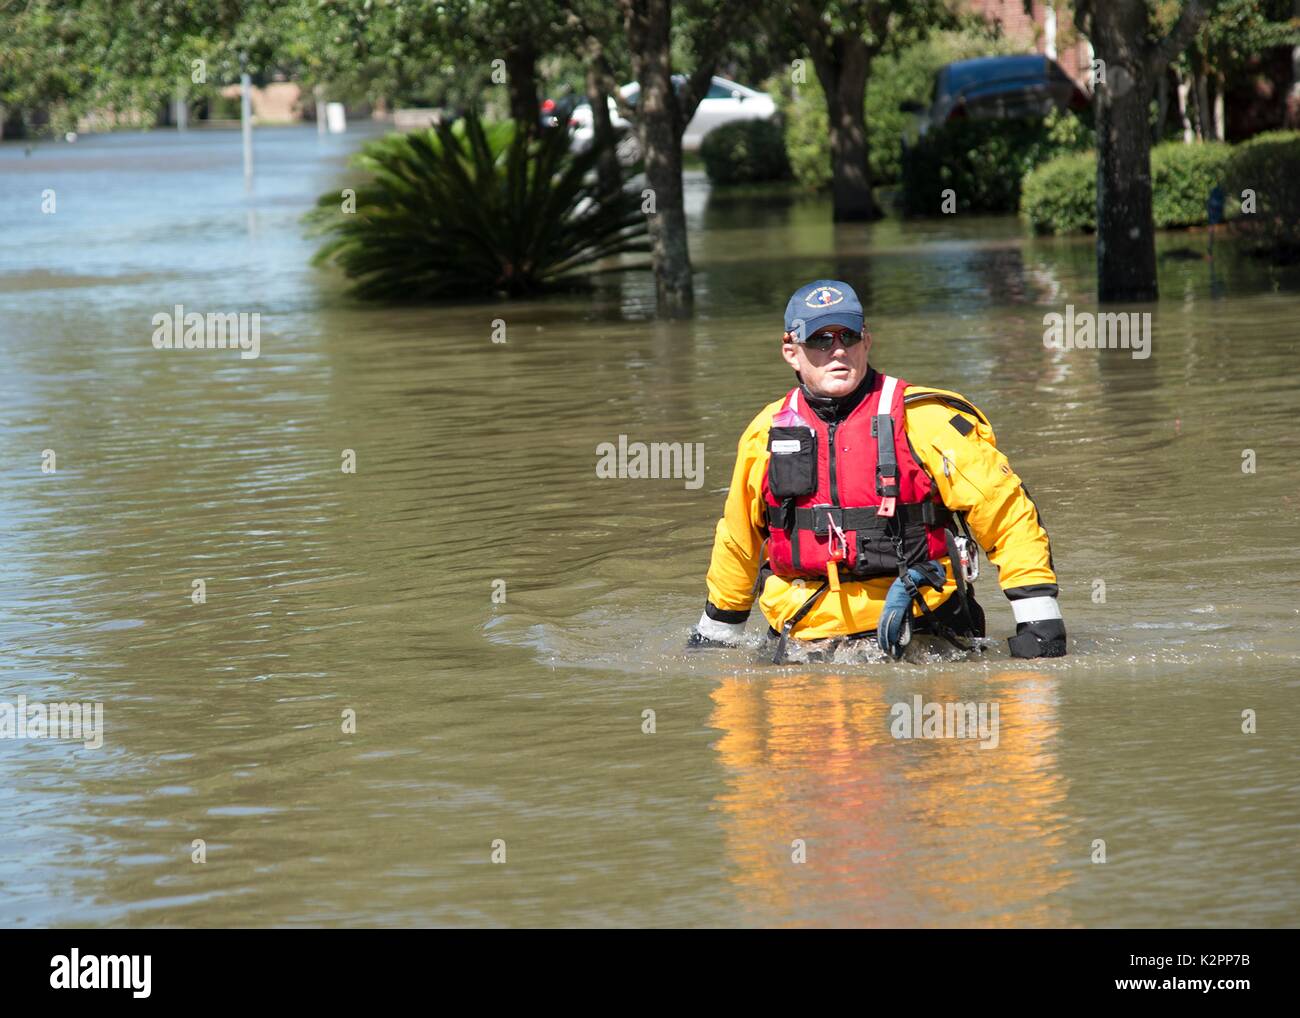 Sugar Land, United States. 30th Aug, 2017. Texas National Guard Rescue Specialist Samuel Hendricks, wades through a residential area searching for stranded residents in the aftermath of Hurricane Harvey August 30, 2017 in Sugar Land, Texas. Credit: Planetpix/Alamy Live News Stock Photo